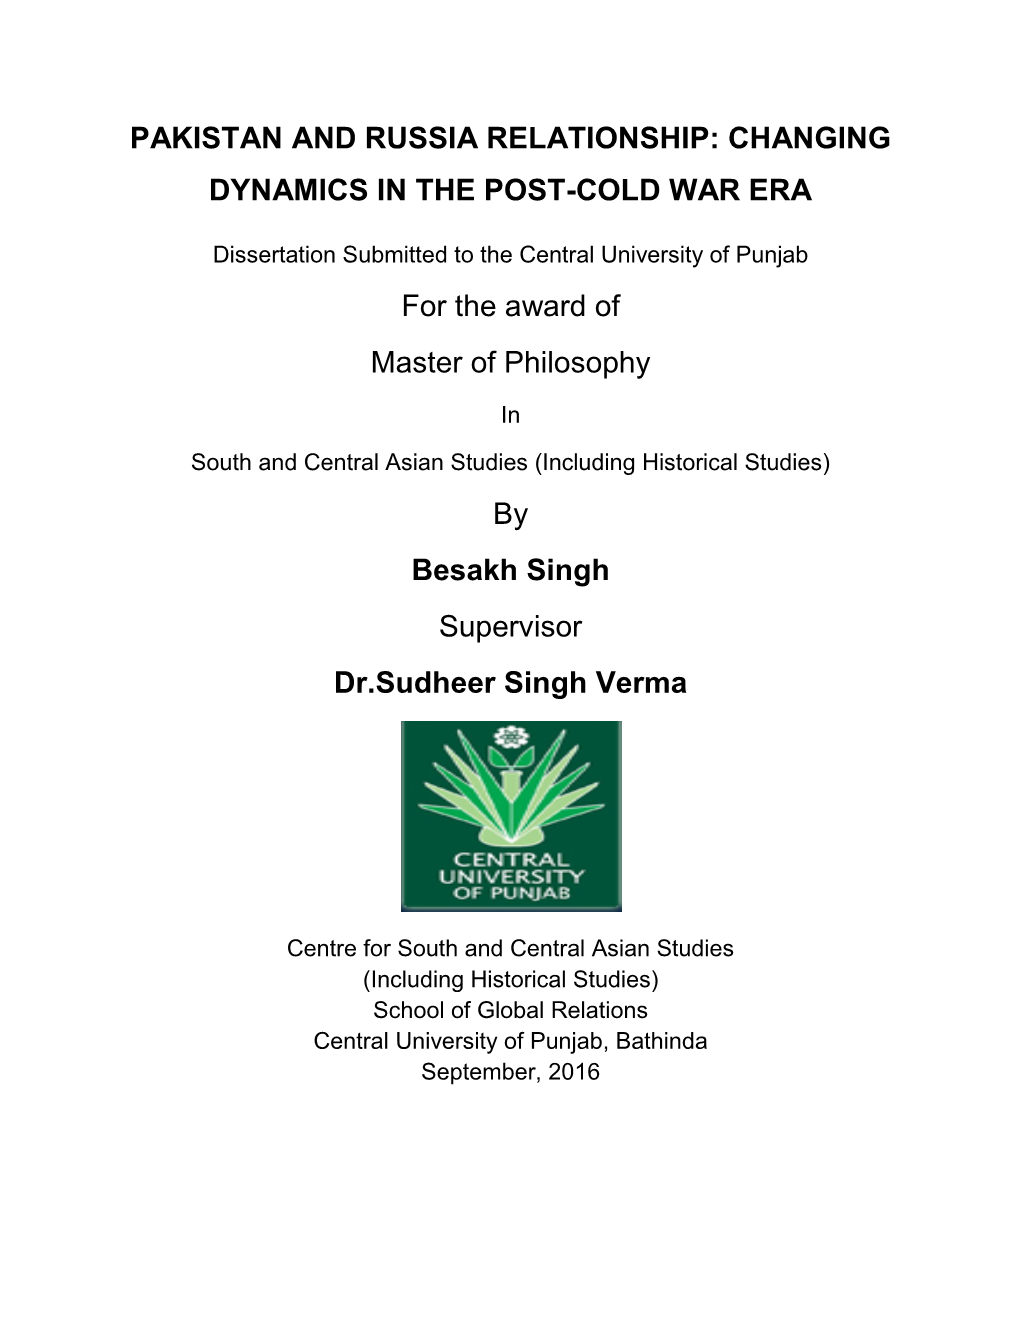 Pakistan and Russia Relationship: Changing Dynamics in the Post-Cold War Era